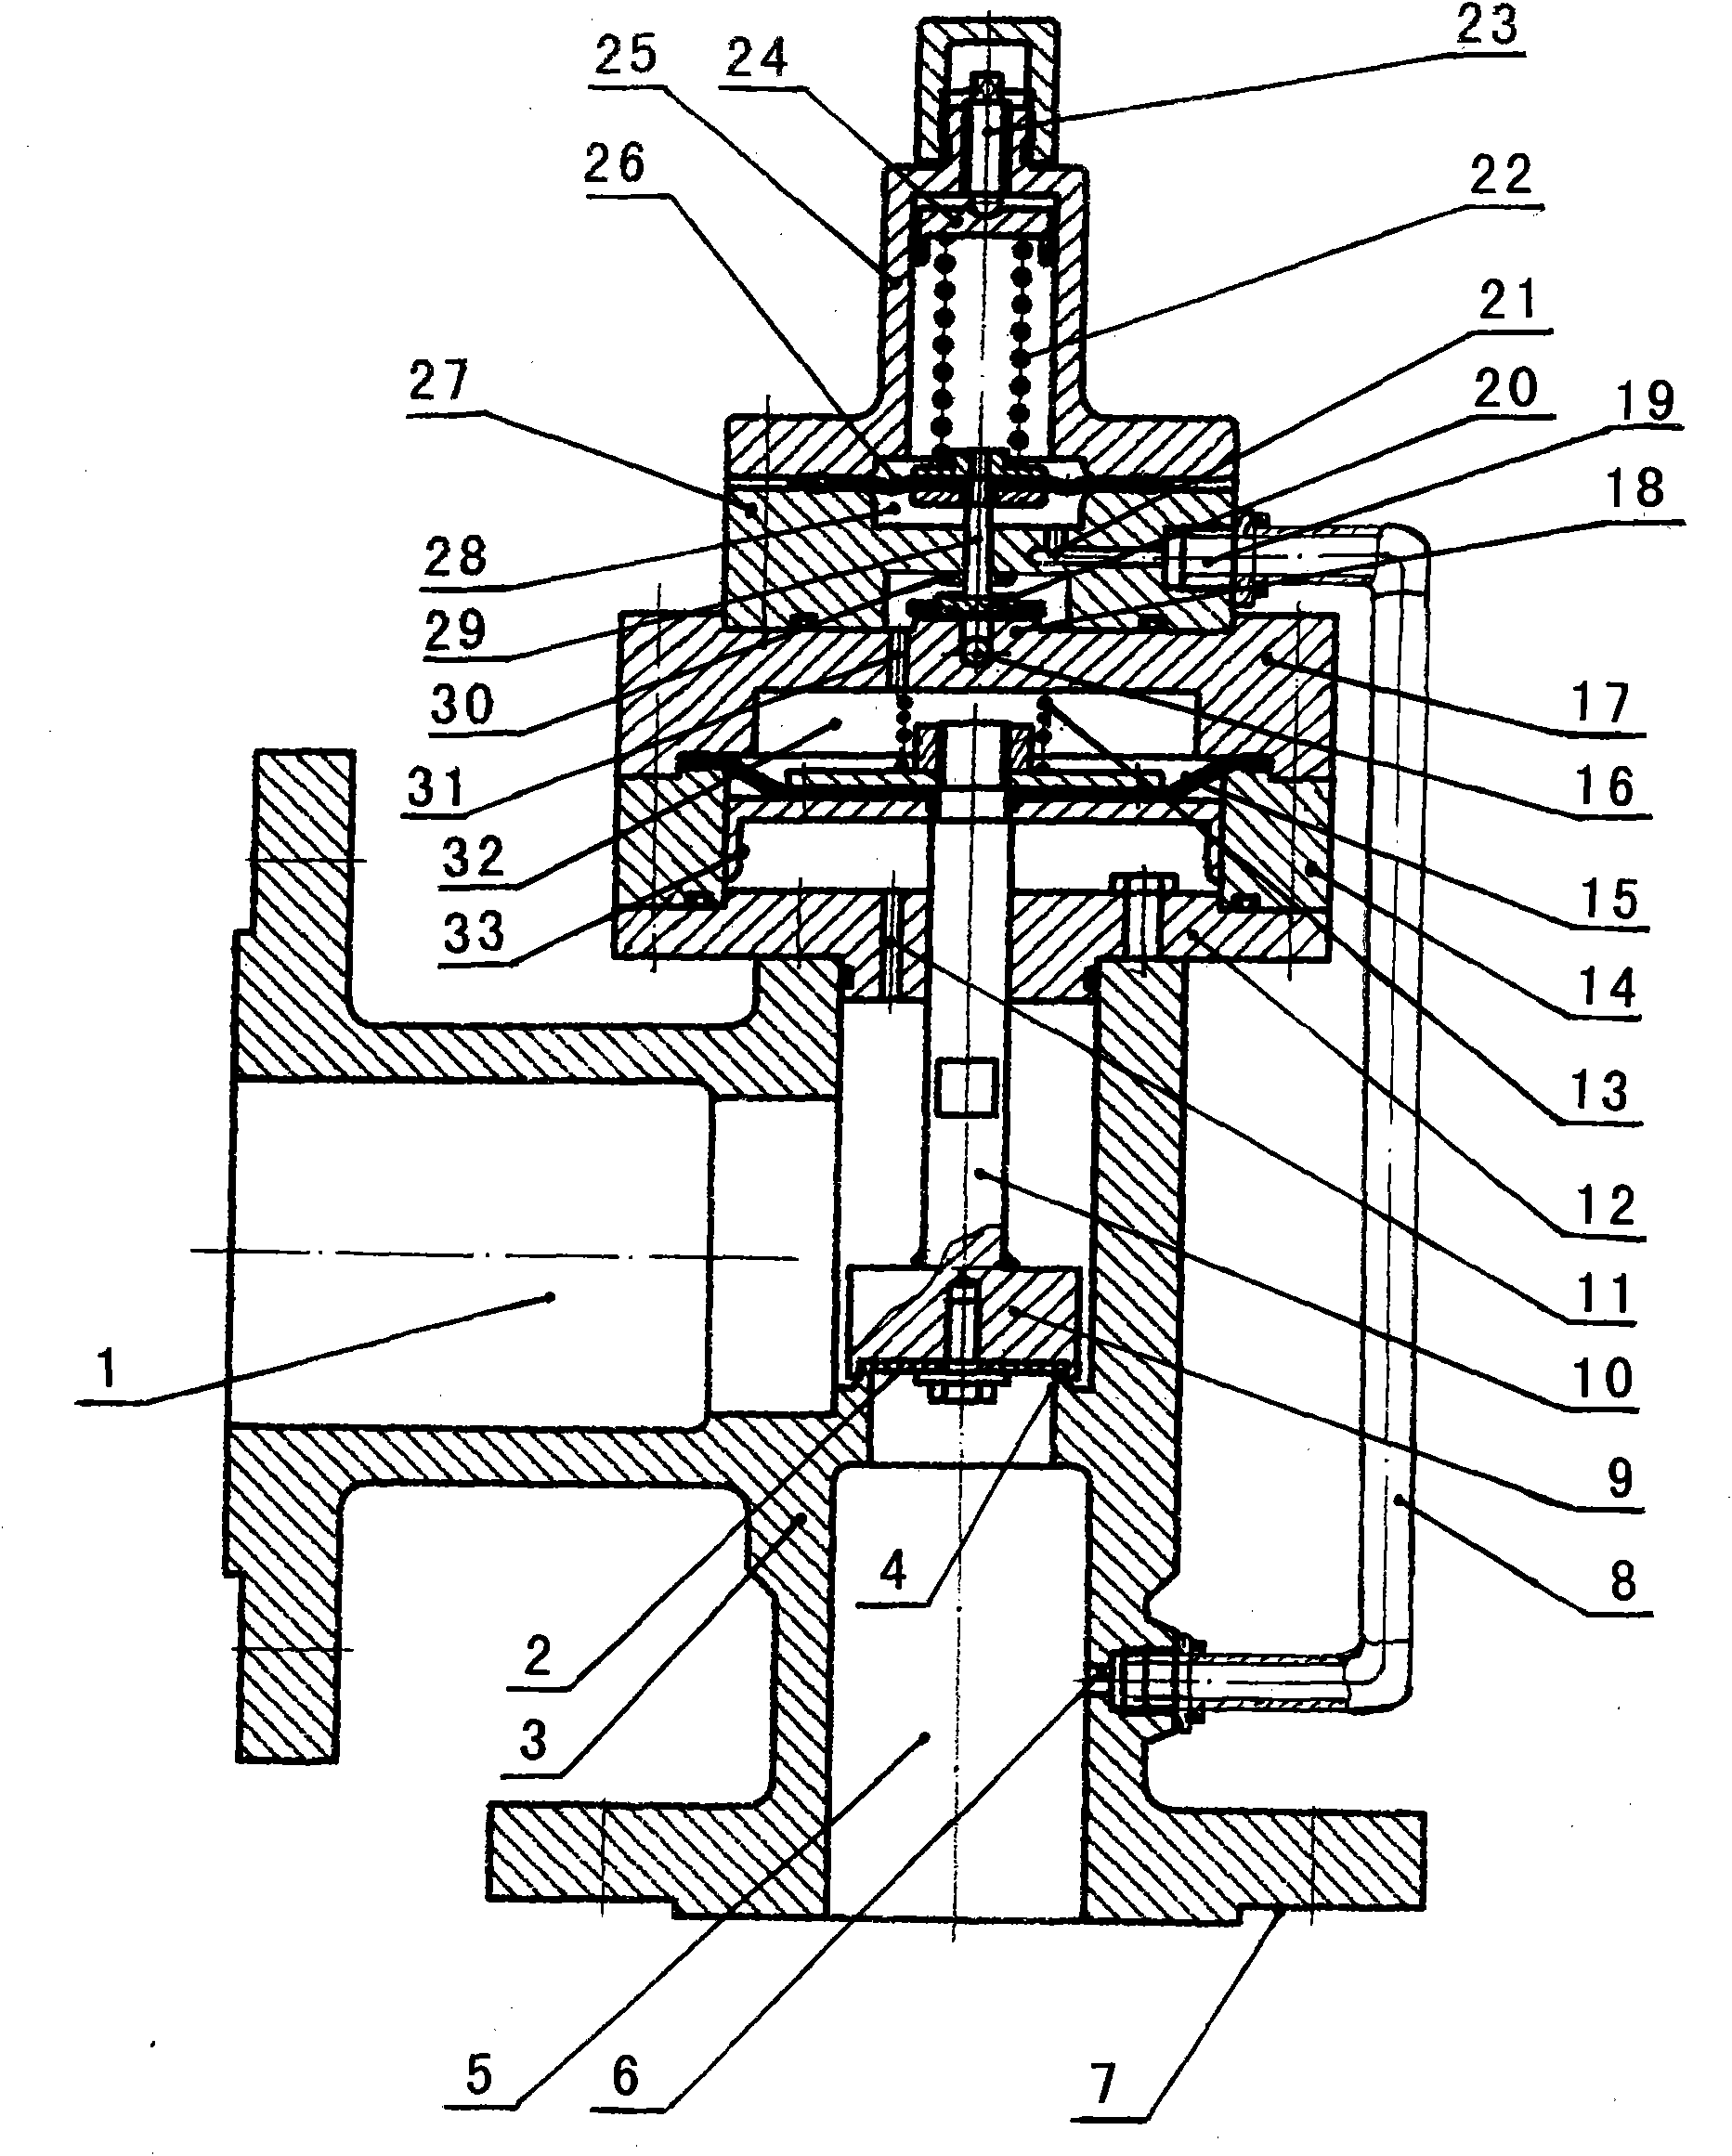 Low-pressure pilot operated safety valve